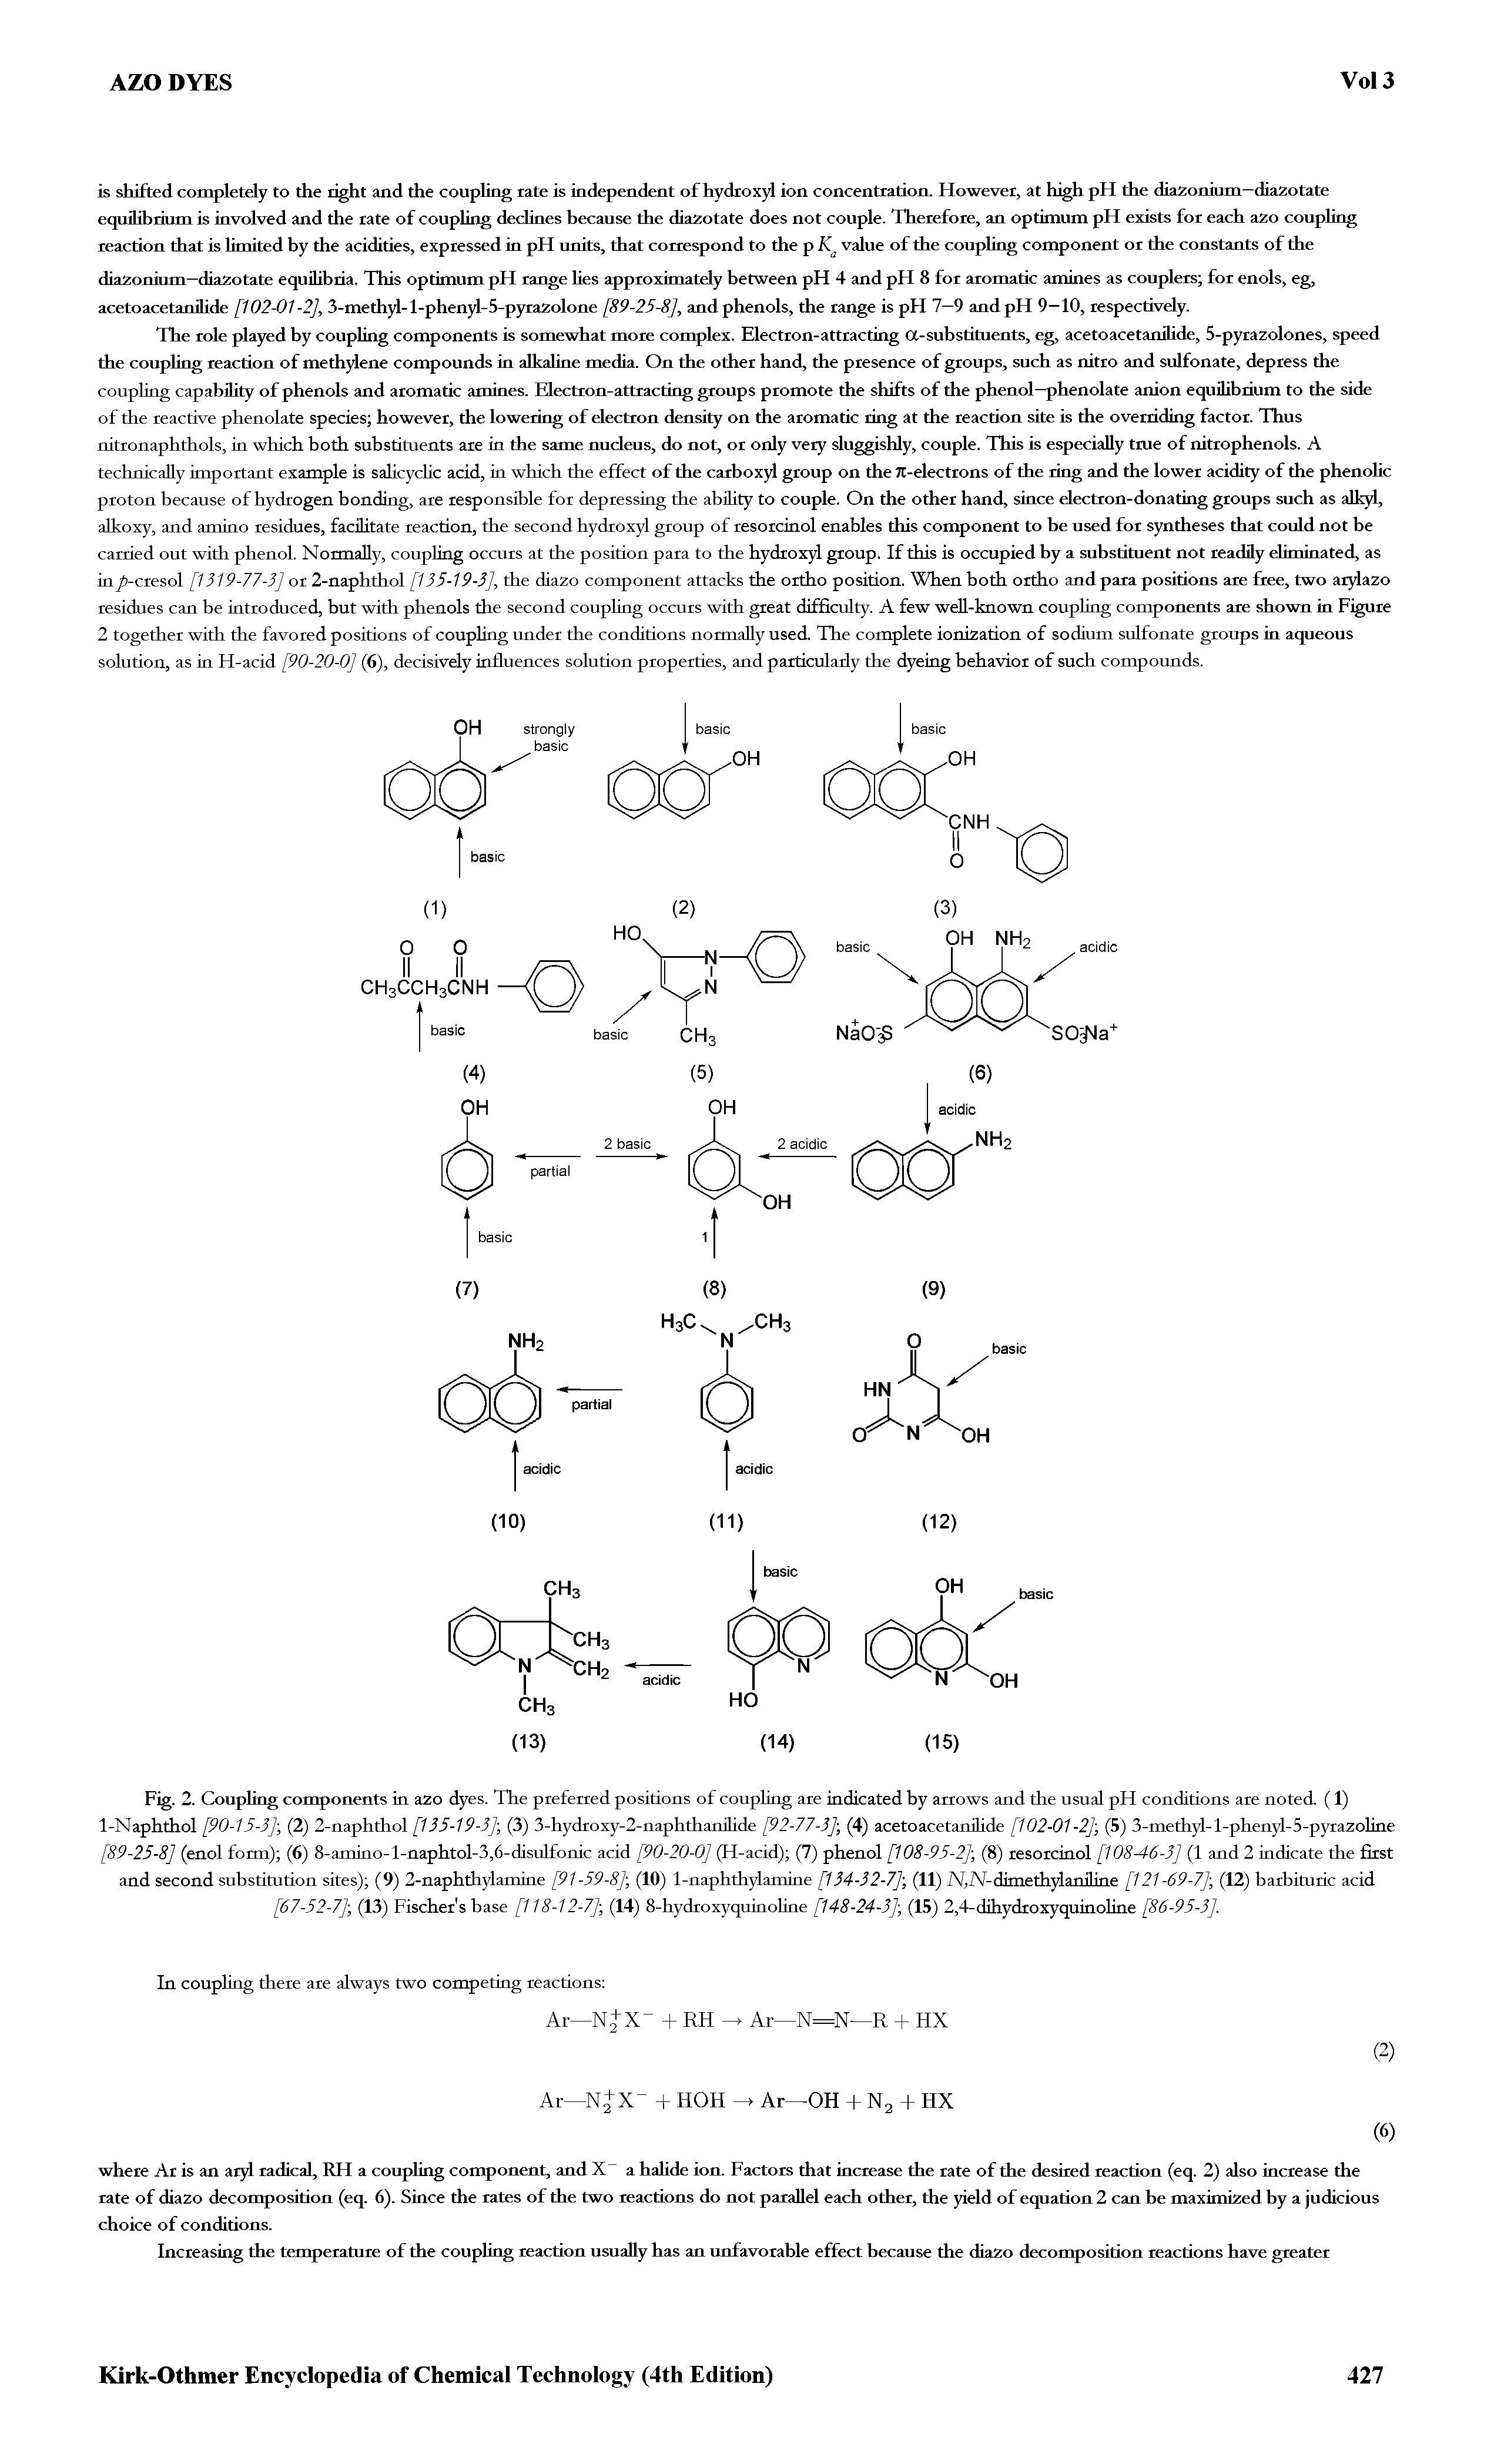 Fig. 2. Coupling components in azo dyes. The preferred positions of coupling are indicated by arrows and the usual pH conditions are noted. (1) 1-Naphthol [90-15-3], (2) 2-naphthol [135-19-3] (3) 3-hydroxy-2-naphthanilide [92-77-3], (4) aceto acetanilide [102-01-2] (5) 3-methyl-l-phenyl-5-pyrazoline [89-25-8] (enol form) (6) 8-amino-l-naphtol-3,6-disulfonic acid [90-20-0] (H-acid) (7) phenol [108-95-2] (8) resorcinol [108-46-3] (1 and 2 indicate the first and second substitution sites) (9) 2-naphthylamine [91-59-8] (10) 1-naphthylamine [134-32-7], (11) N,N-dimethylaniline [121 -69-7] (12) barbituric acid [67-52-7] (13) Fischer s base [118-12-7] (14) 8-hydroxyquinoline [148-24-3] (15) 2,4-dihydroxyquinoline [86-95-3],...